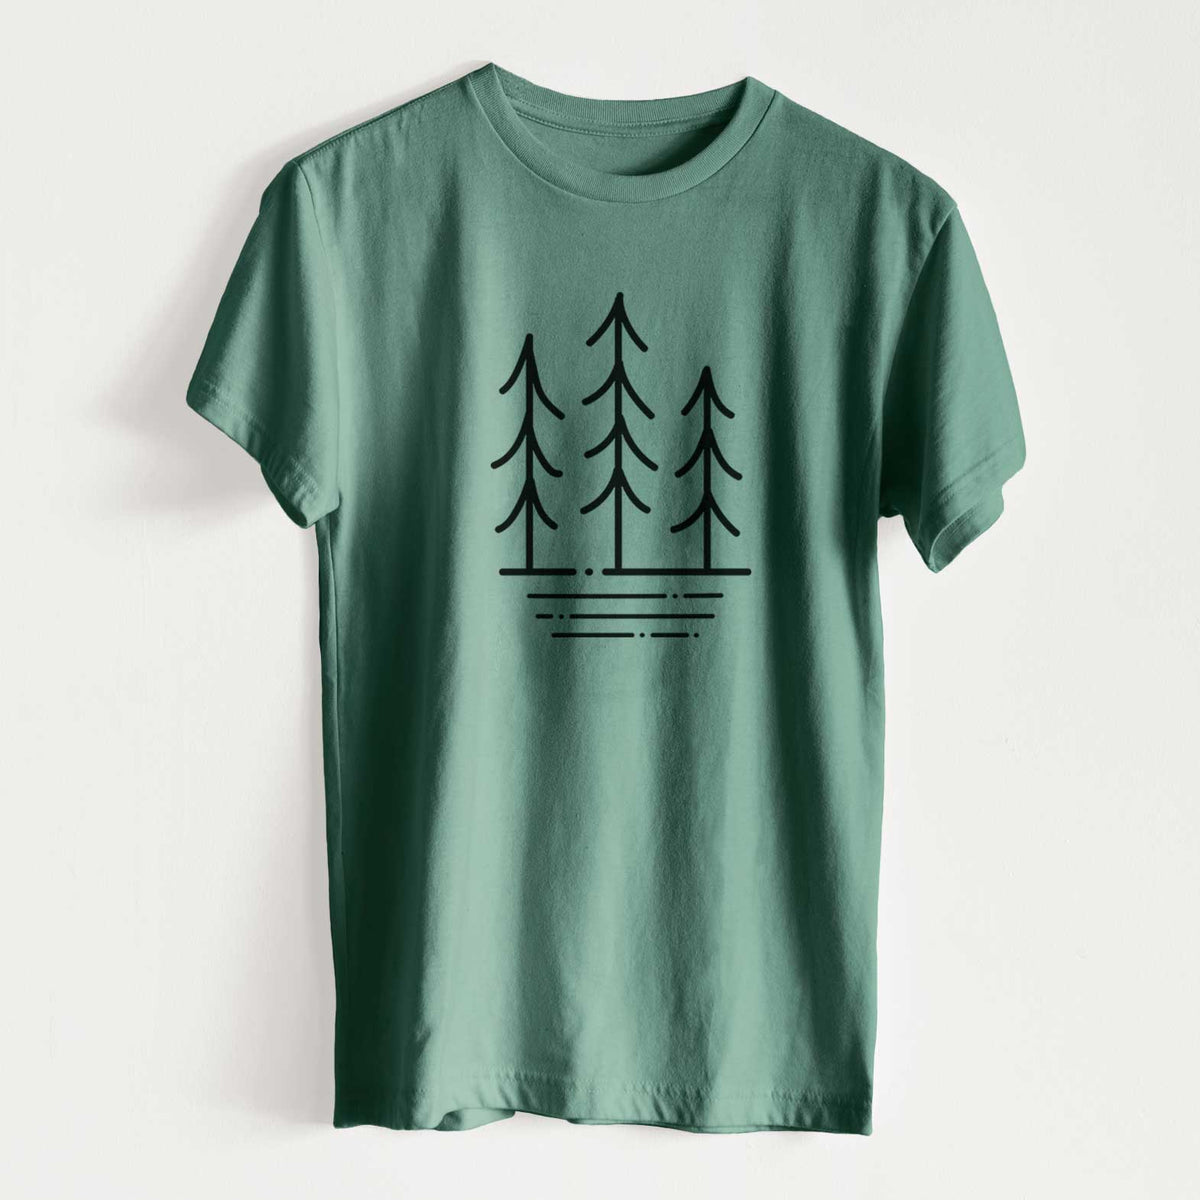 Three Trees - Unisex Recycled Eco Tee  - CLOSEOUT - FINAL SALE